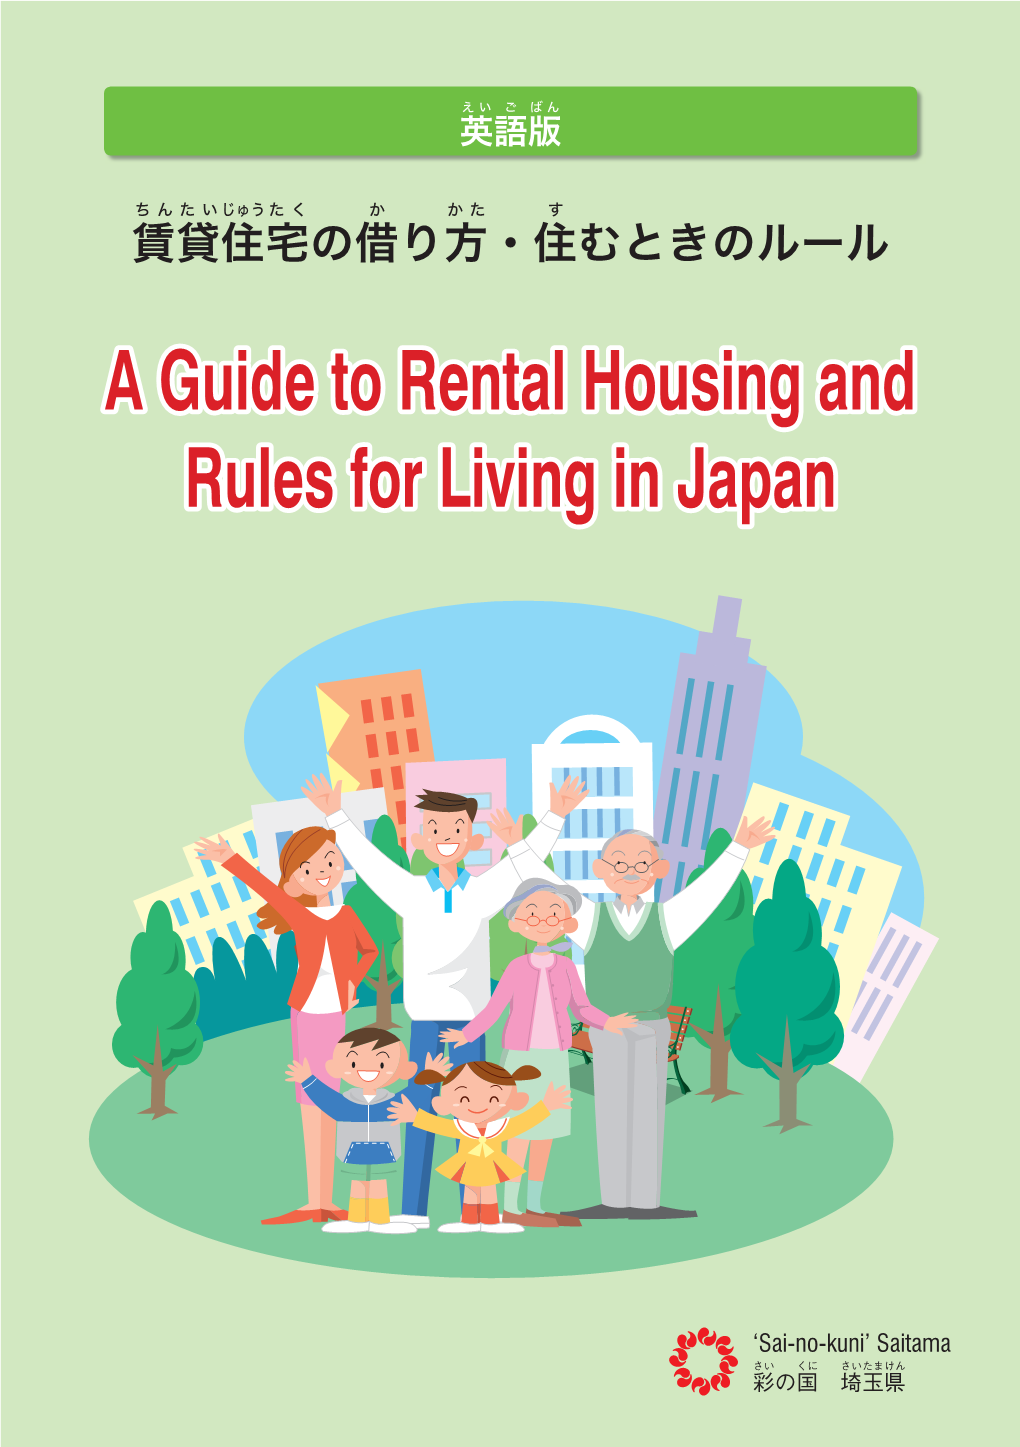 A Guide to Rental Housing and Rules for Living in Japan